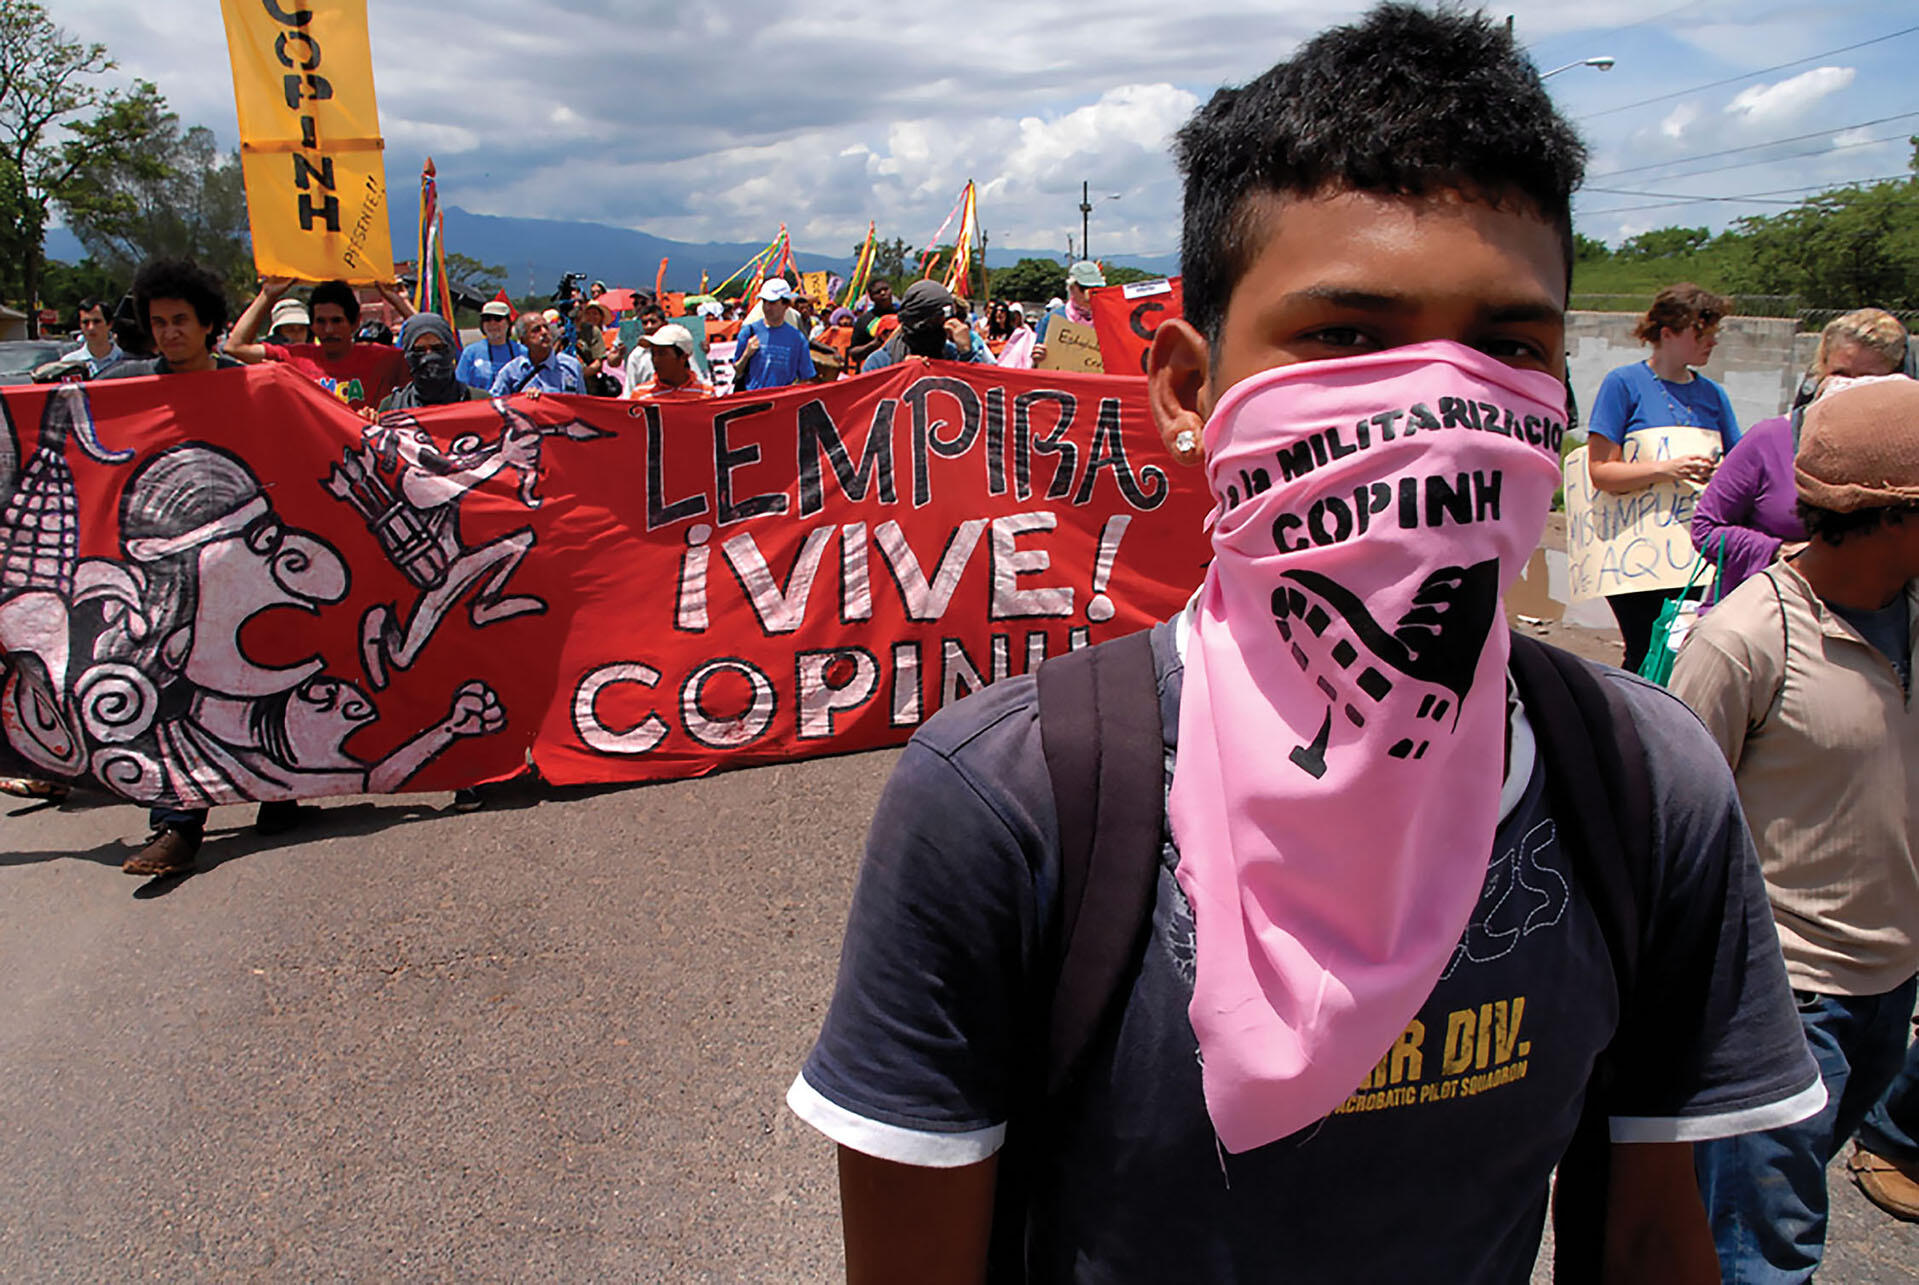 A COPINH protestor wearing a pink bandana as a mask marches in a protest against U.S. military bases in Honduras. (Photo by Felipe Canova.)